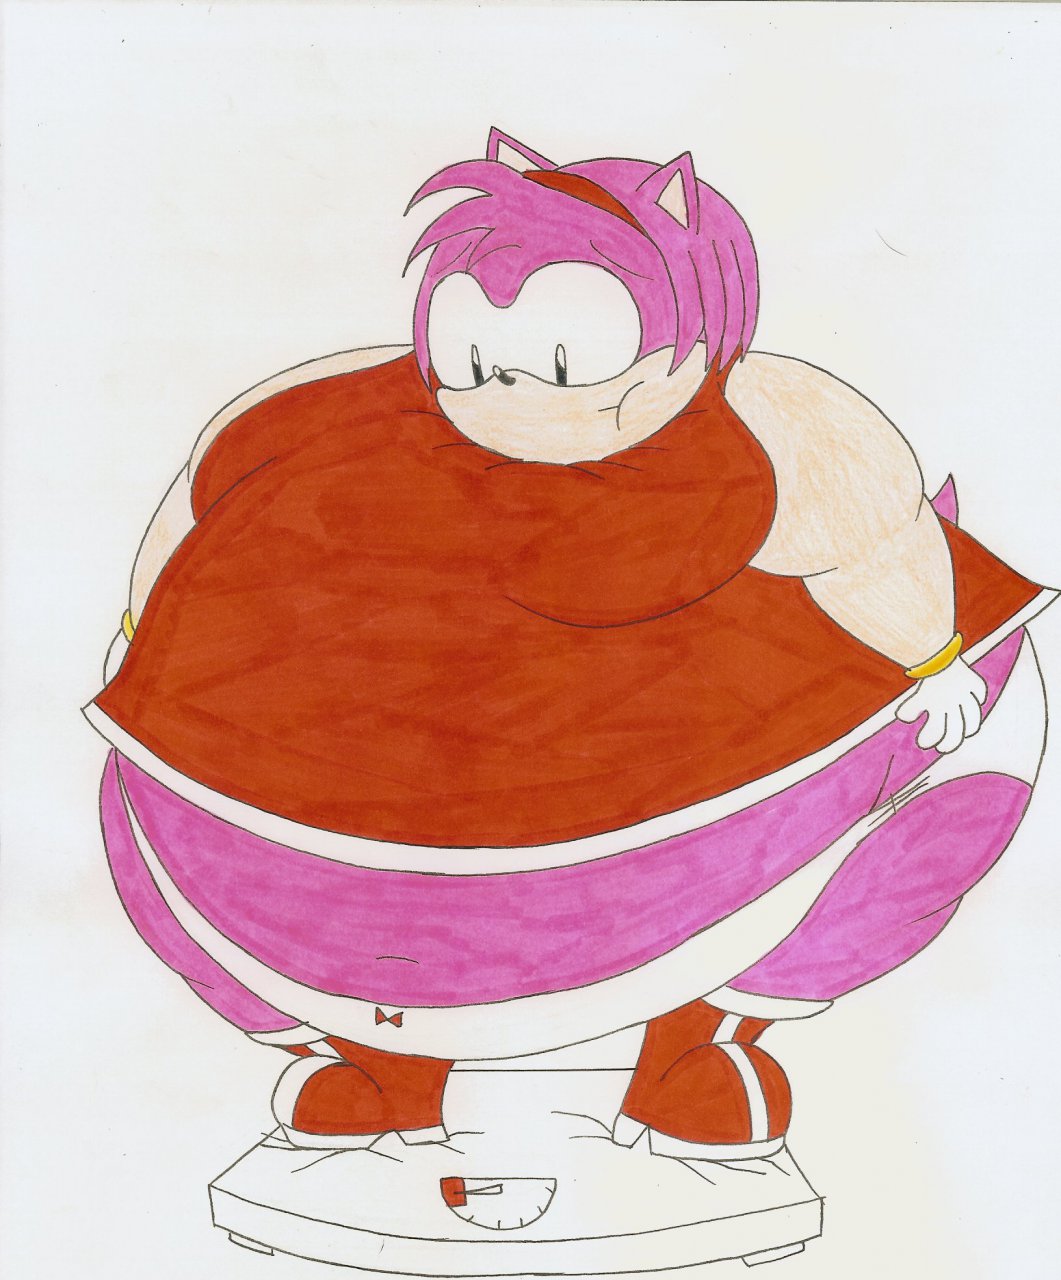 Obese Amy Rose. 